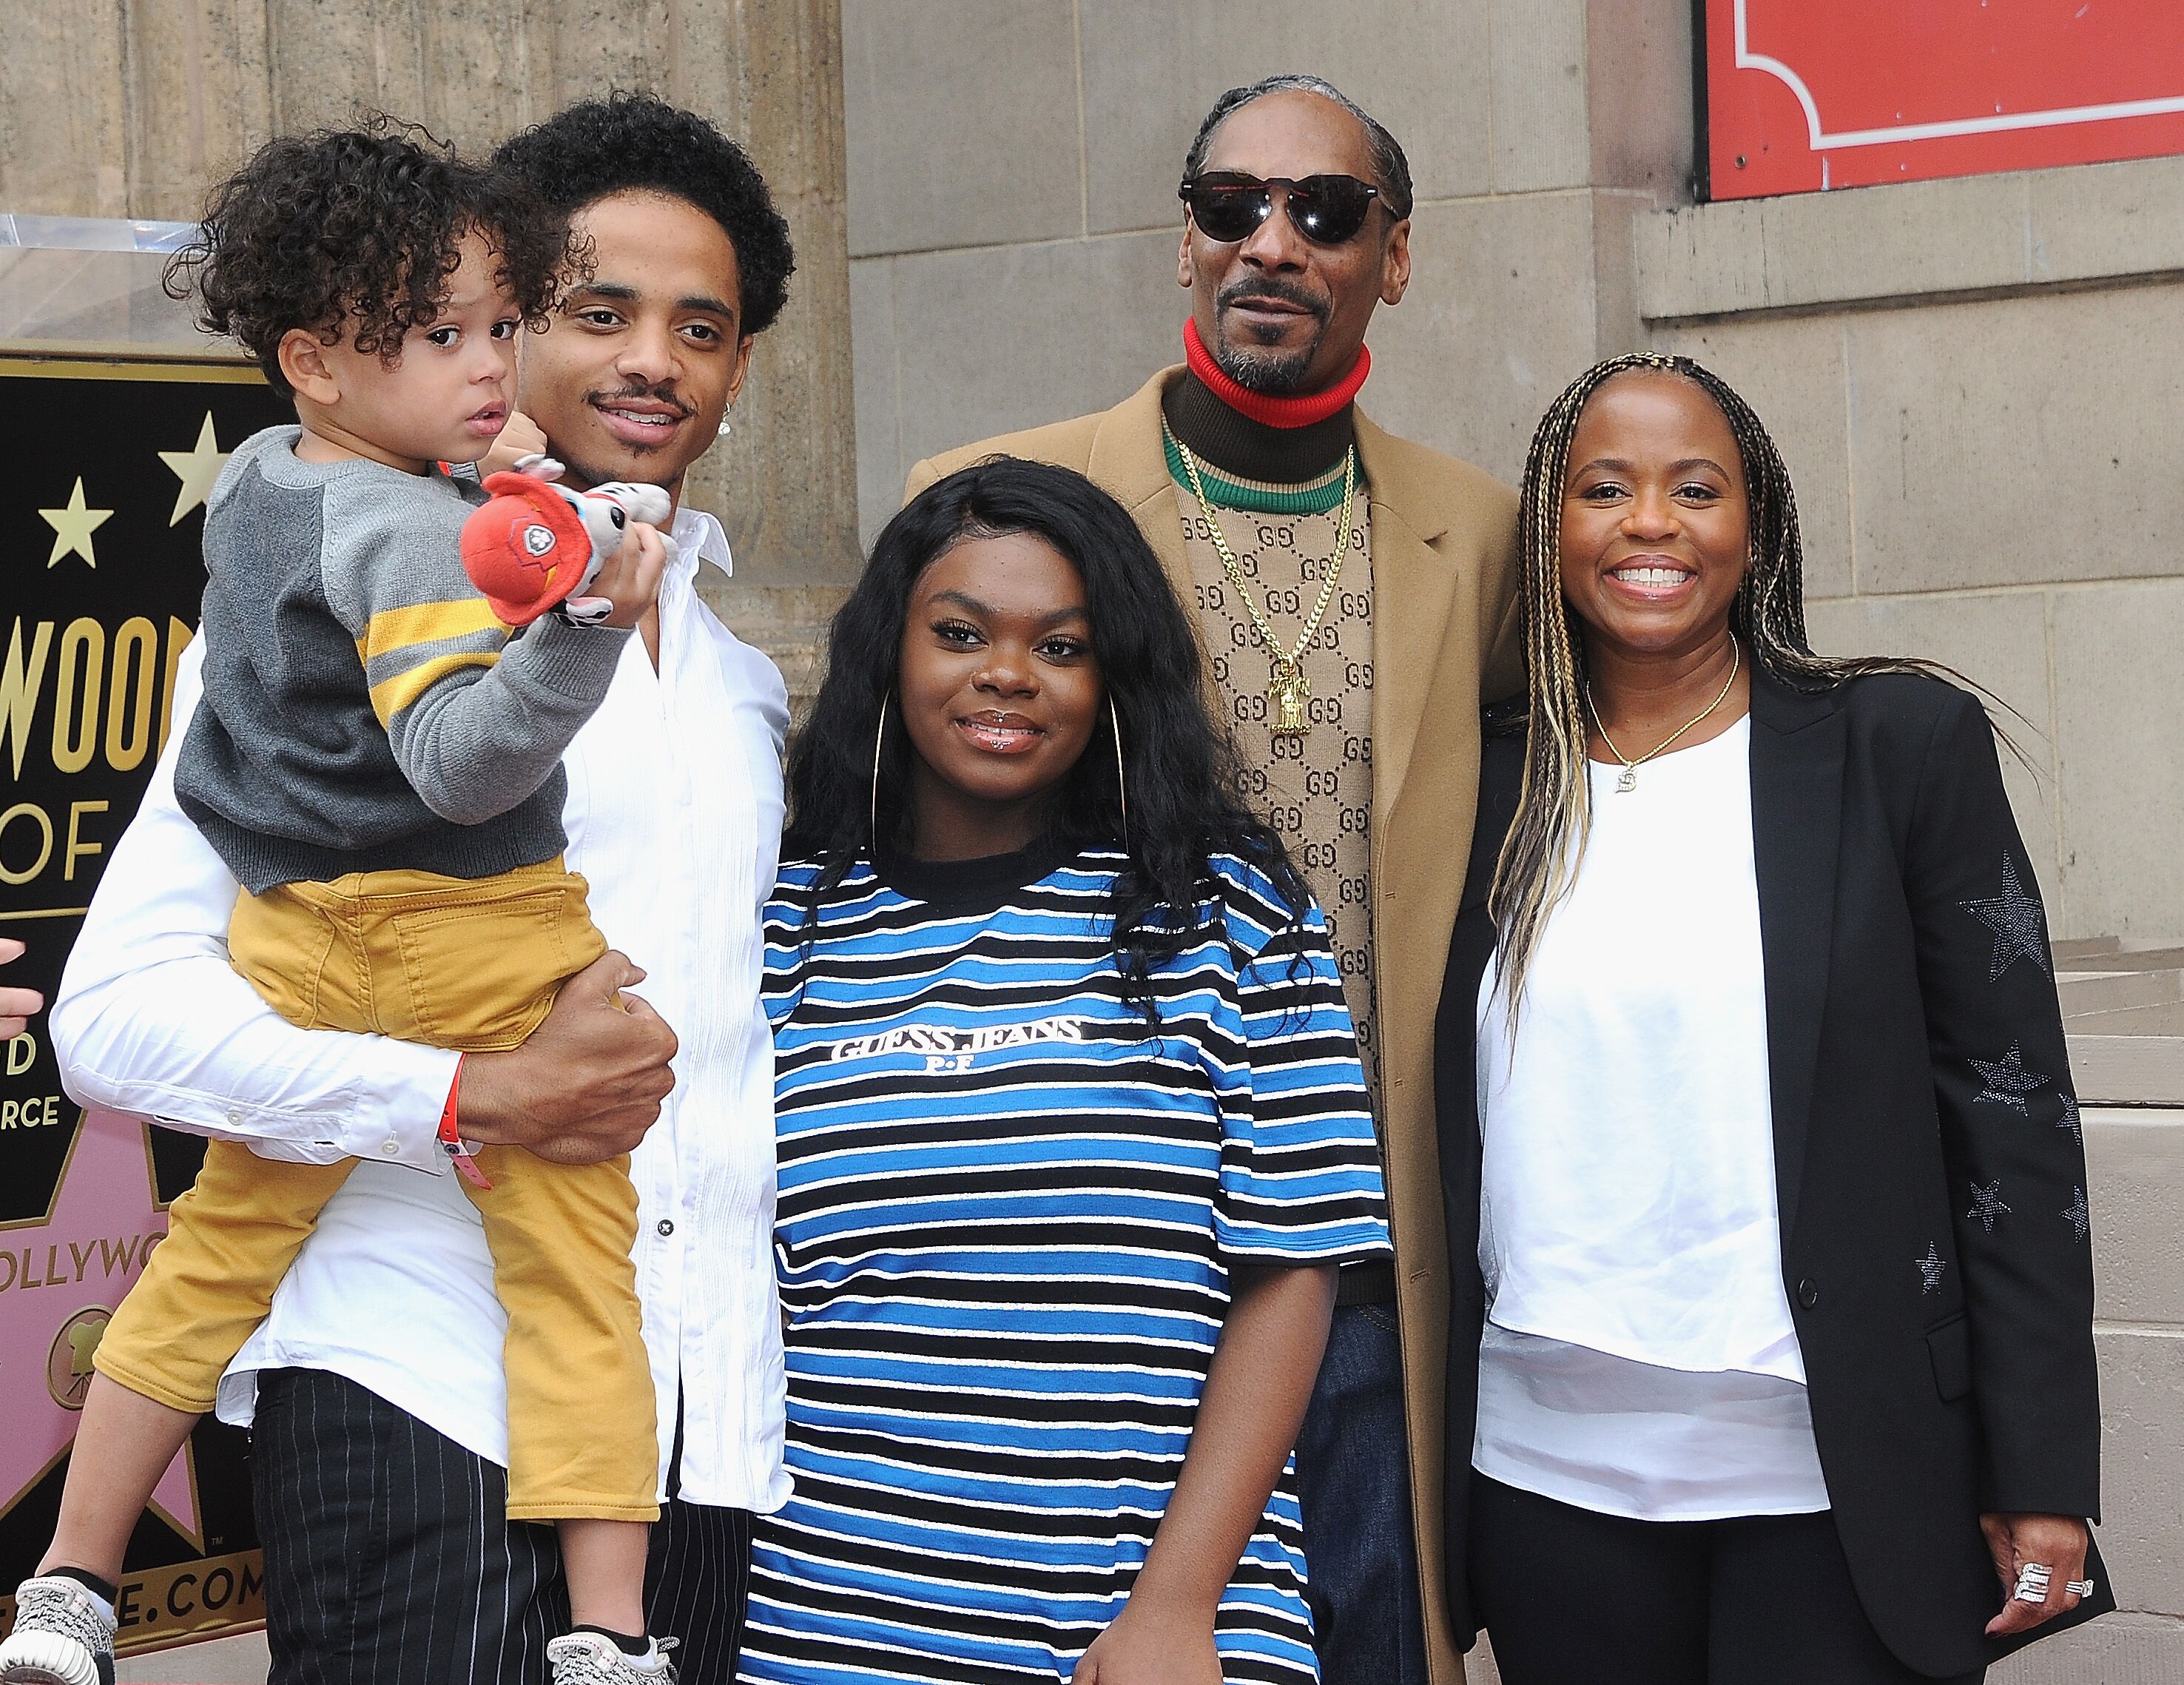 Snoop Dogg and Shante Taylor with family attends Snoop Dogg's star ceremony on The Hollywood Walk of Fame  | Getty Images